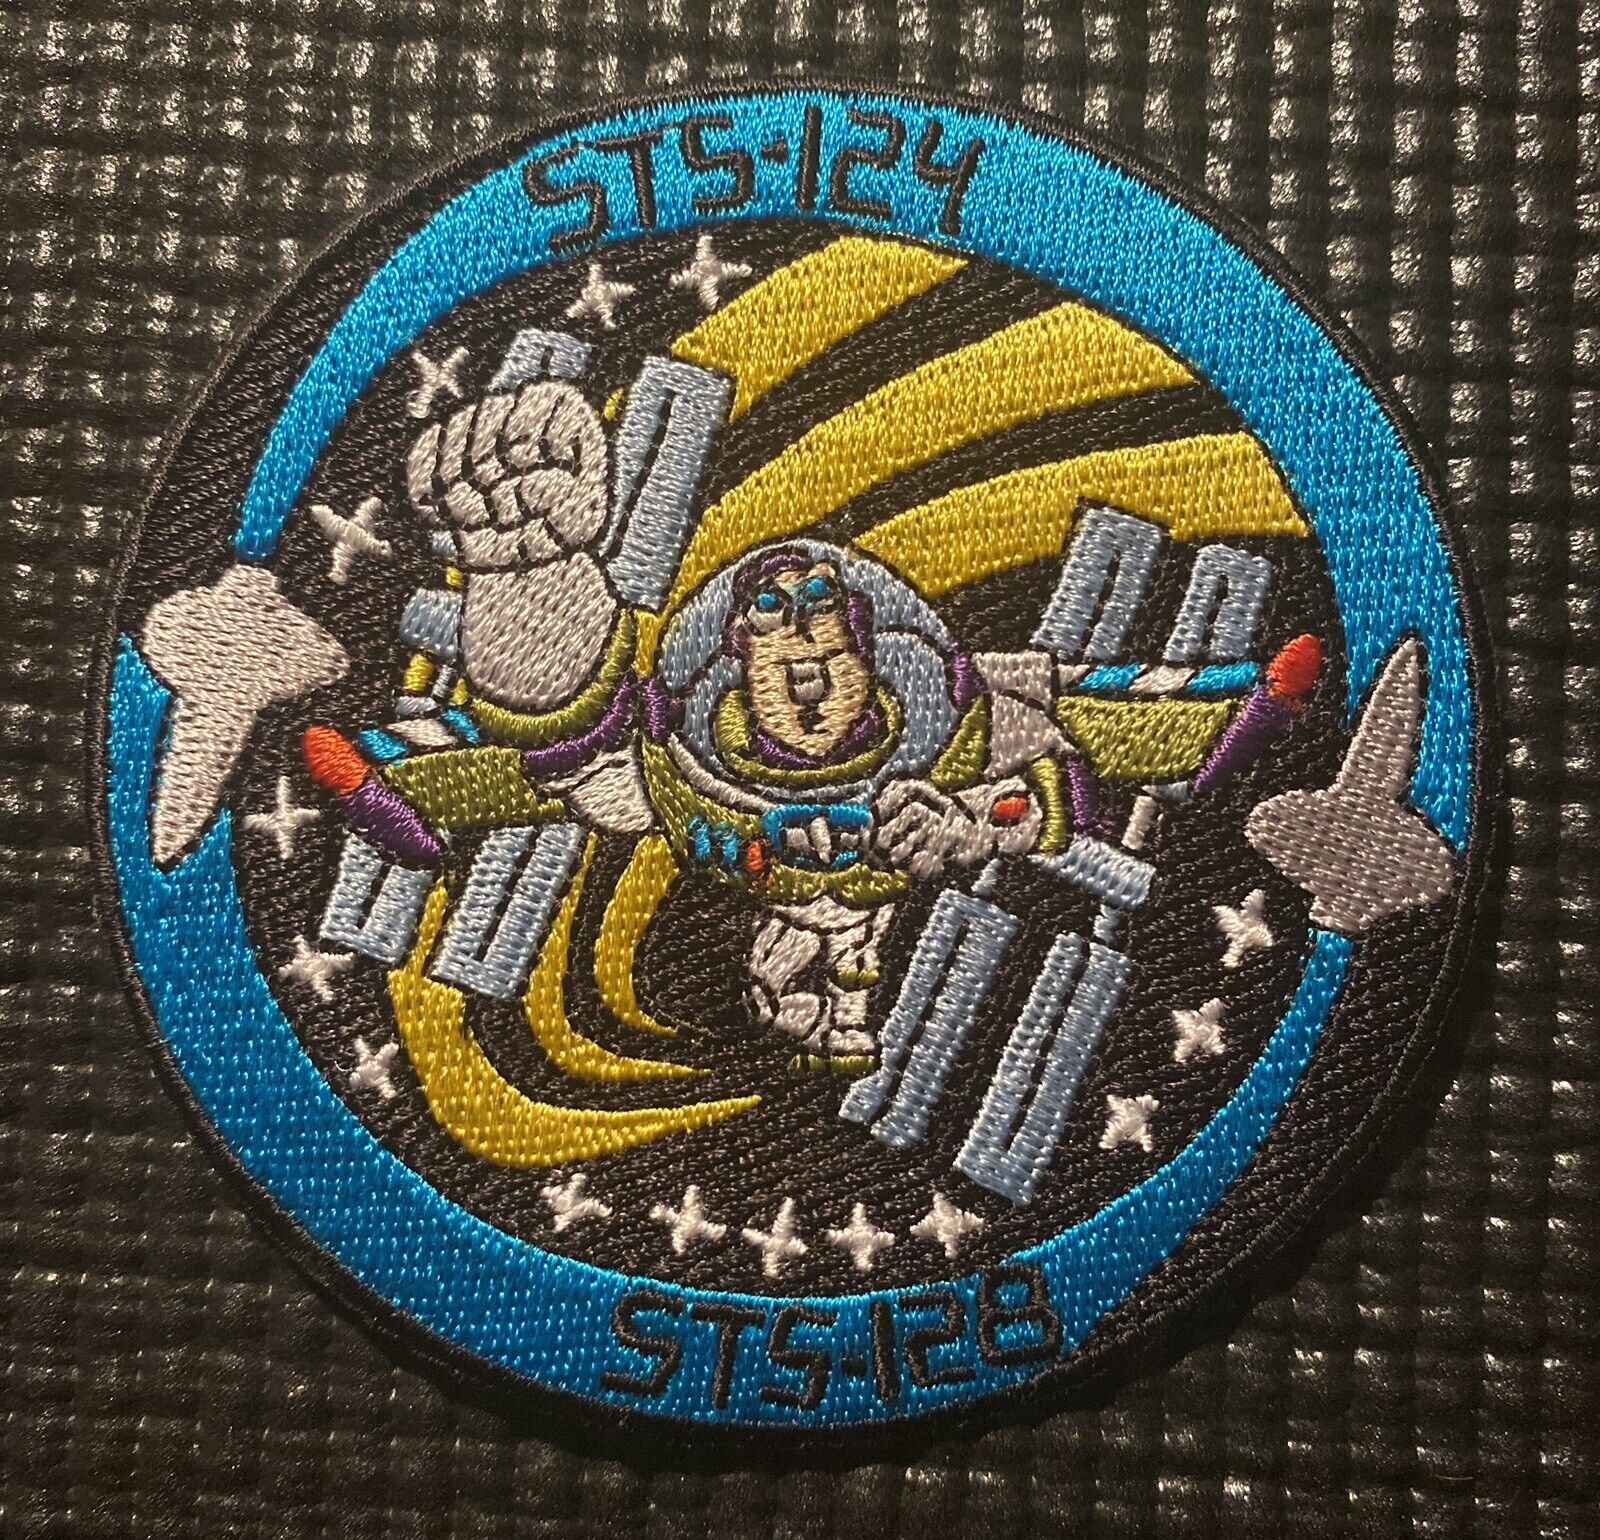 NASA CONTEST PATCH - “BUZZ LIGHTYEAR” STS-124/STS-128 ISS MISSION - 3.5”